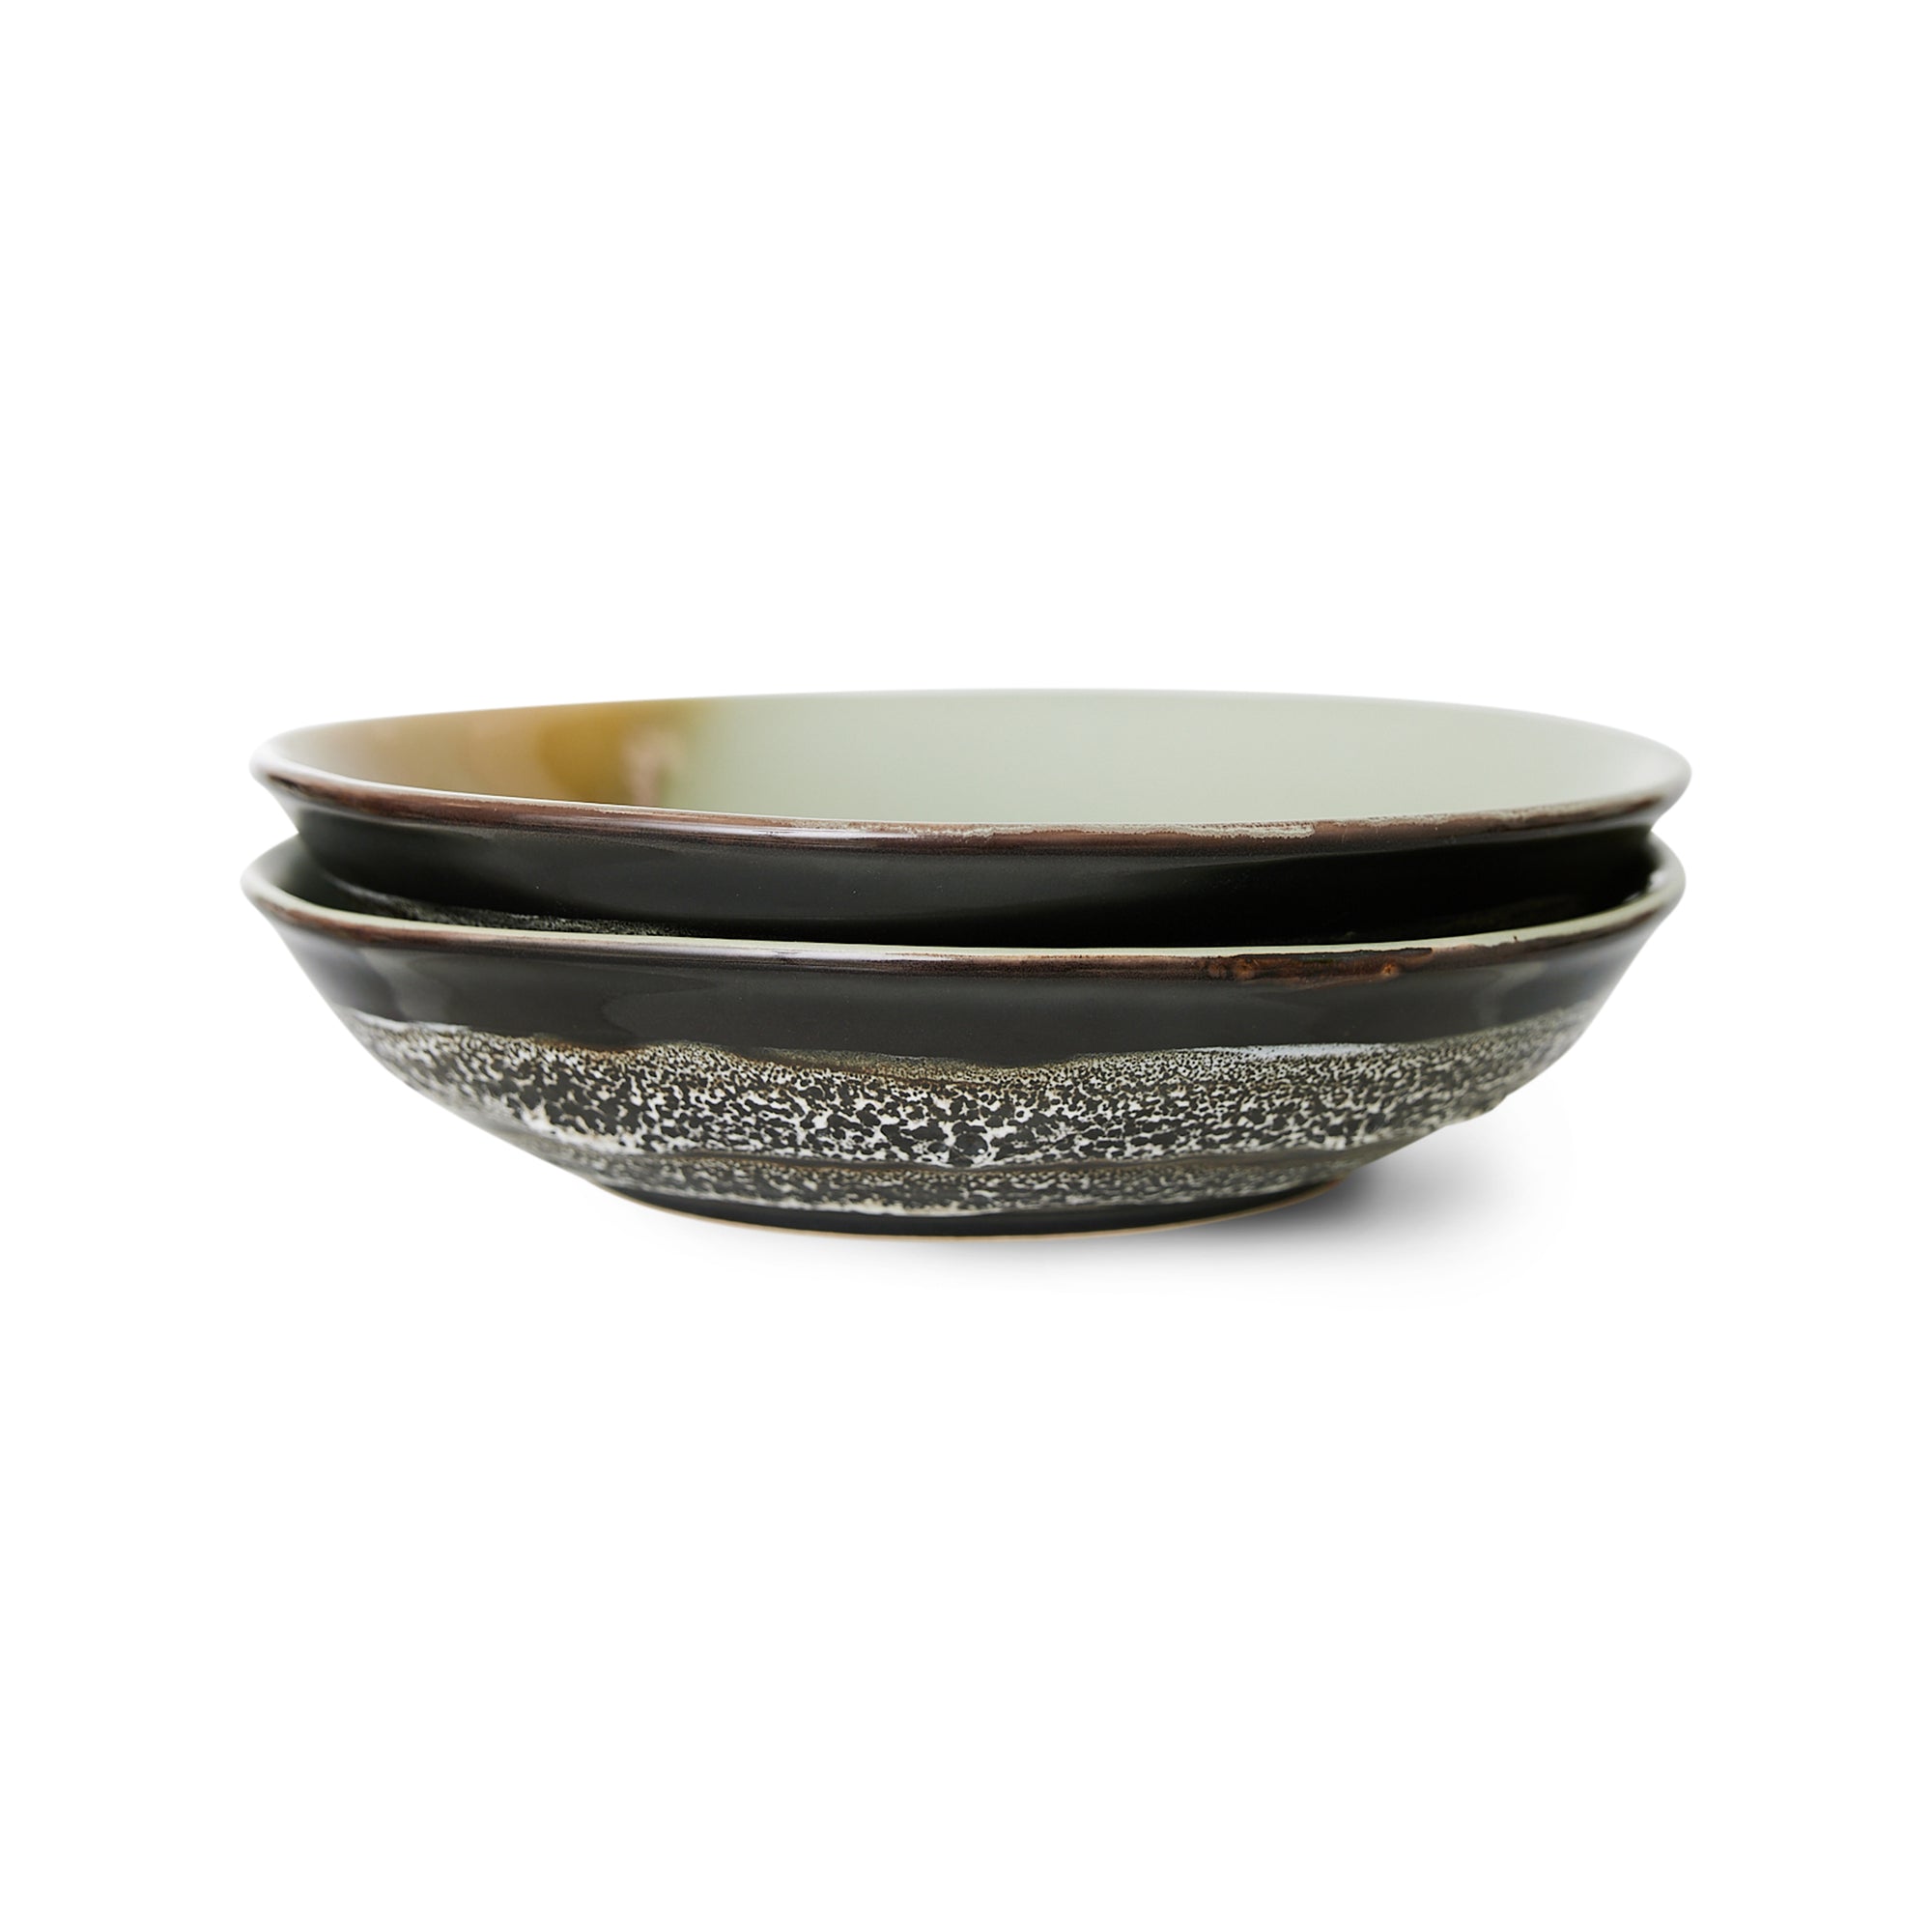 HKLIVING CURRY BOWLS, ACE (SET OF 2)